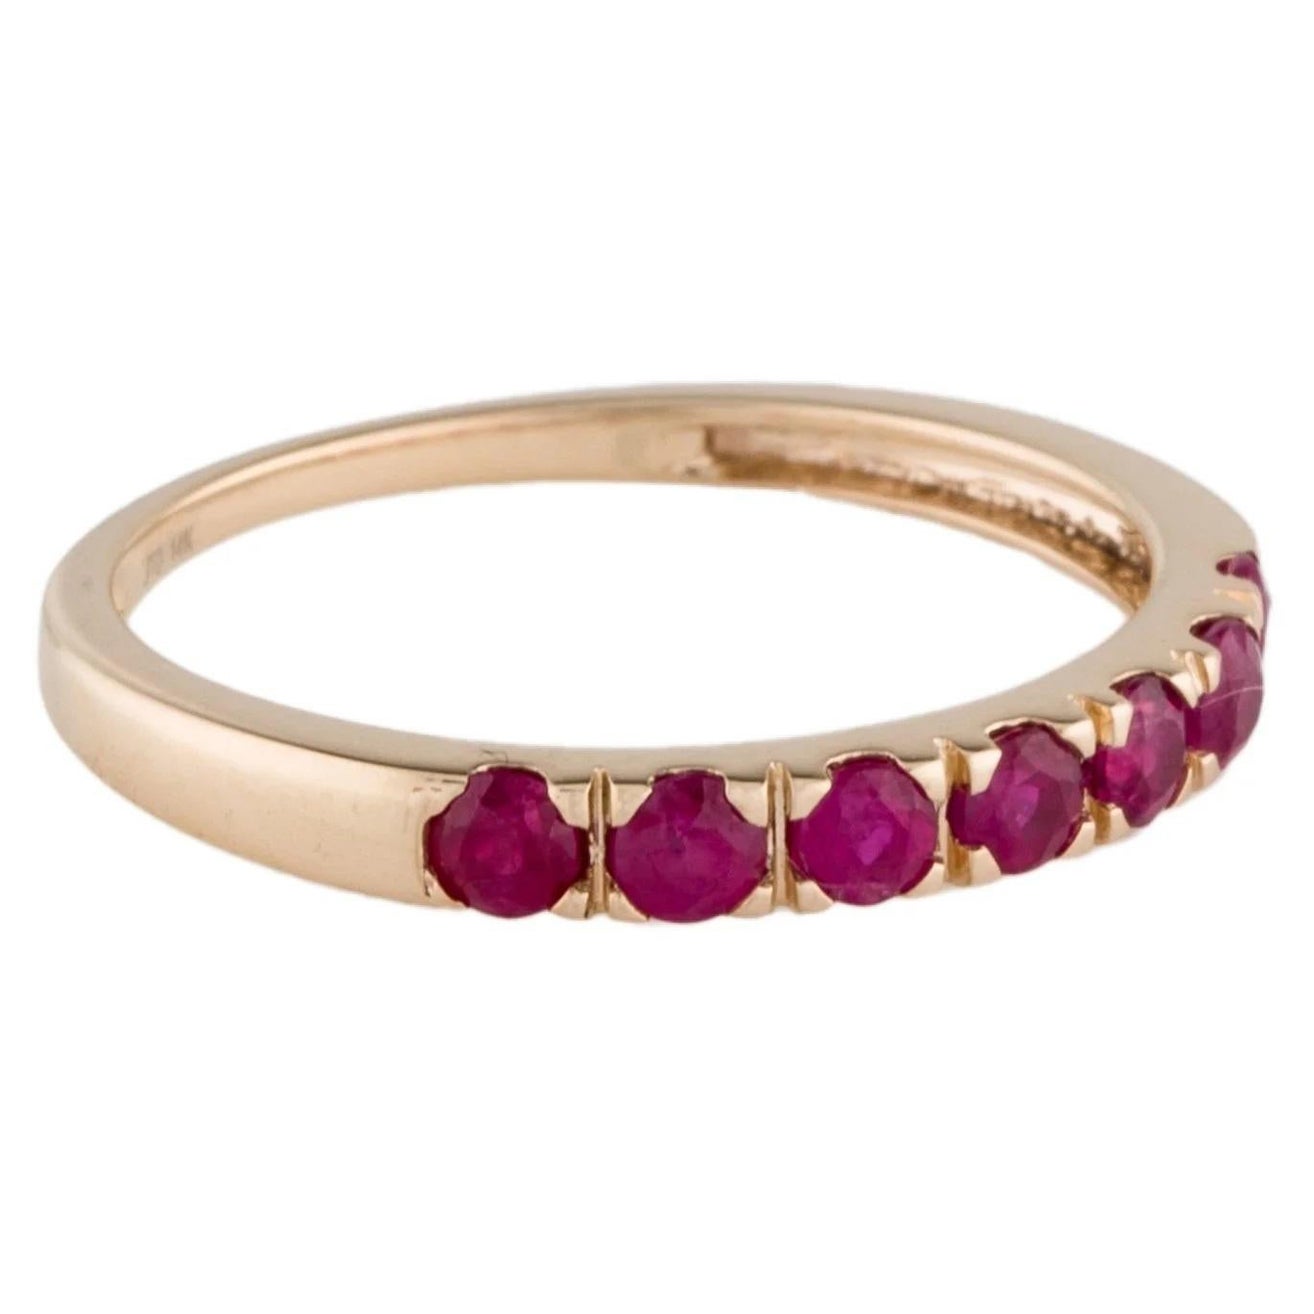 14K Ruby Thin Band Ring  0.68 Carat Round Faceted Ruby  Size 6.75